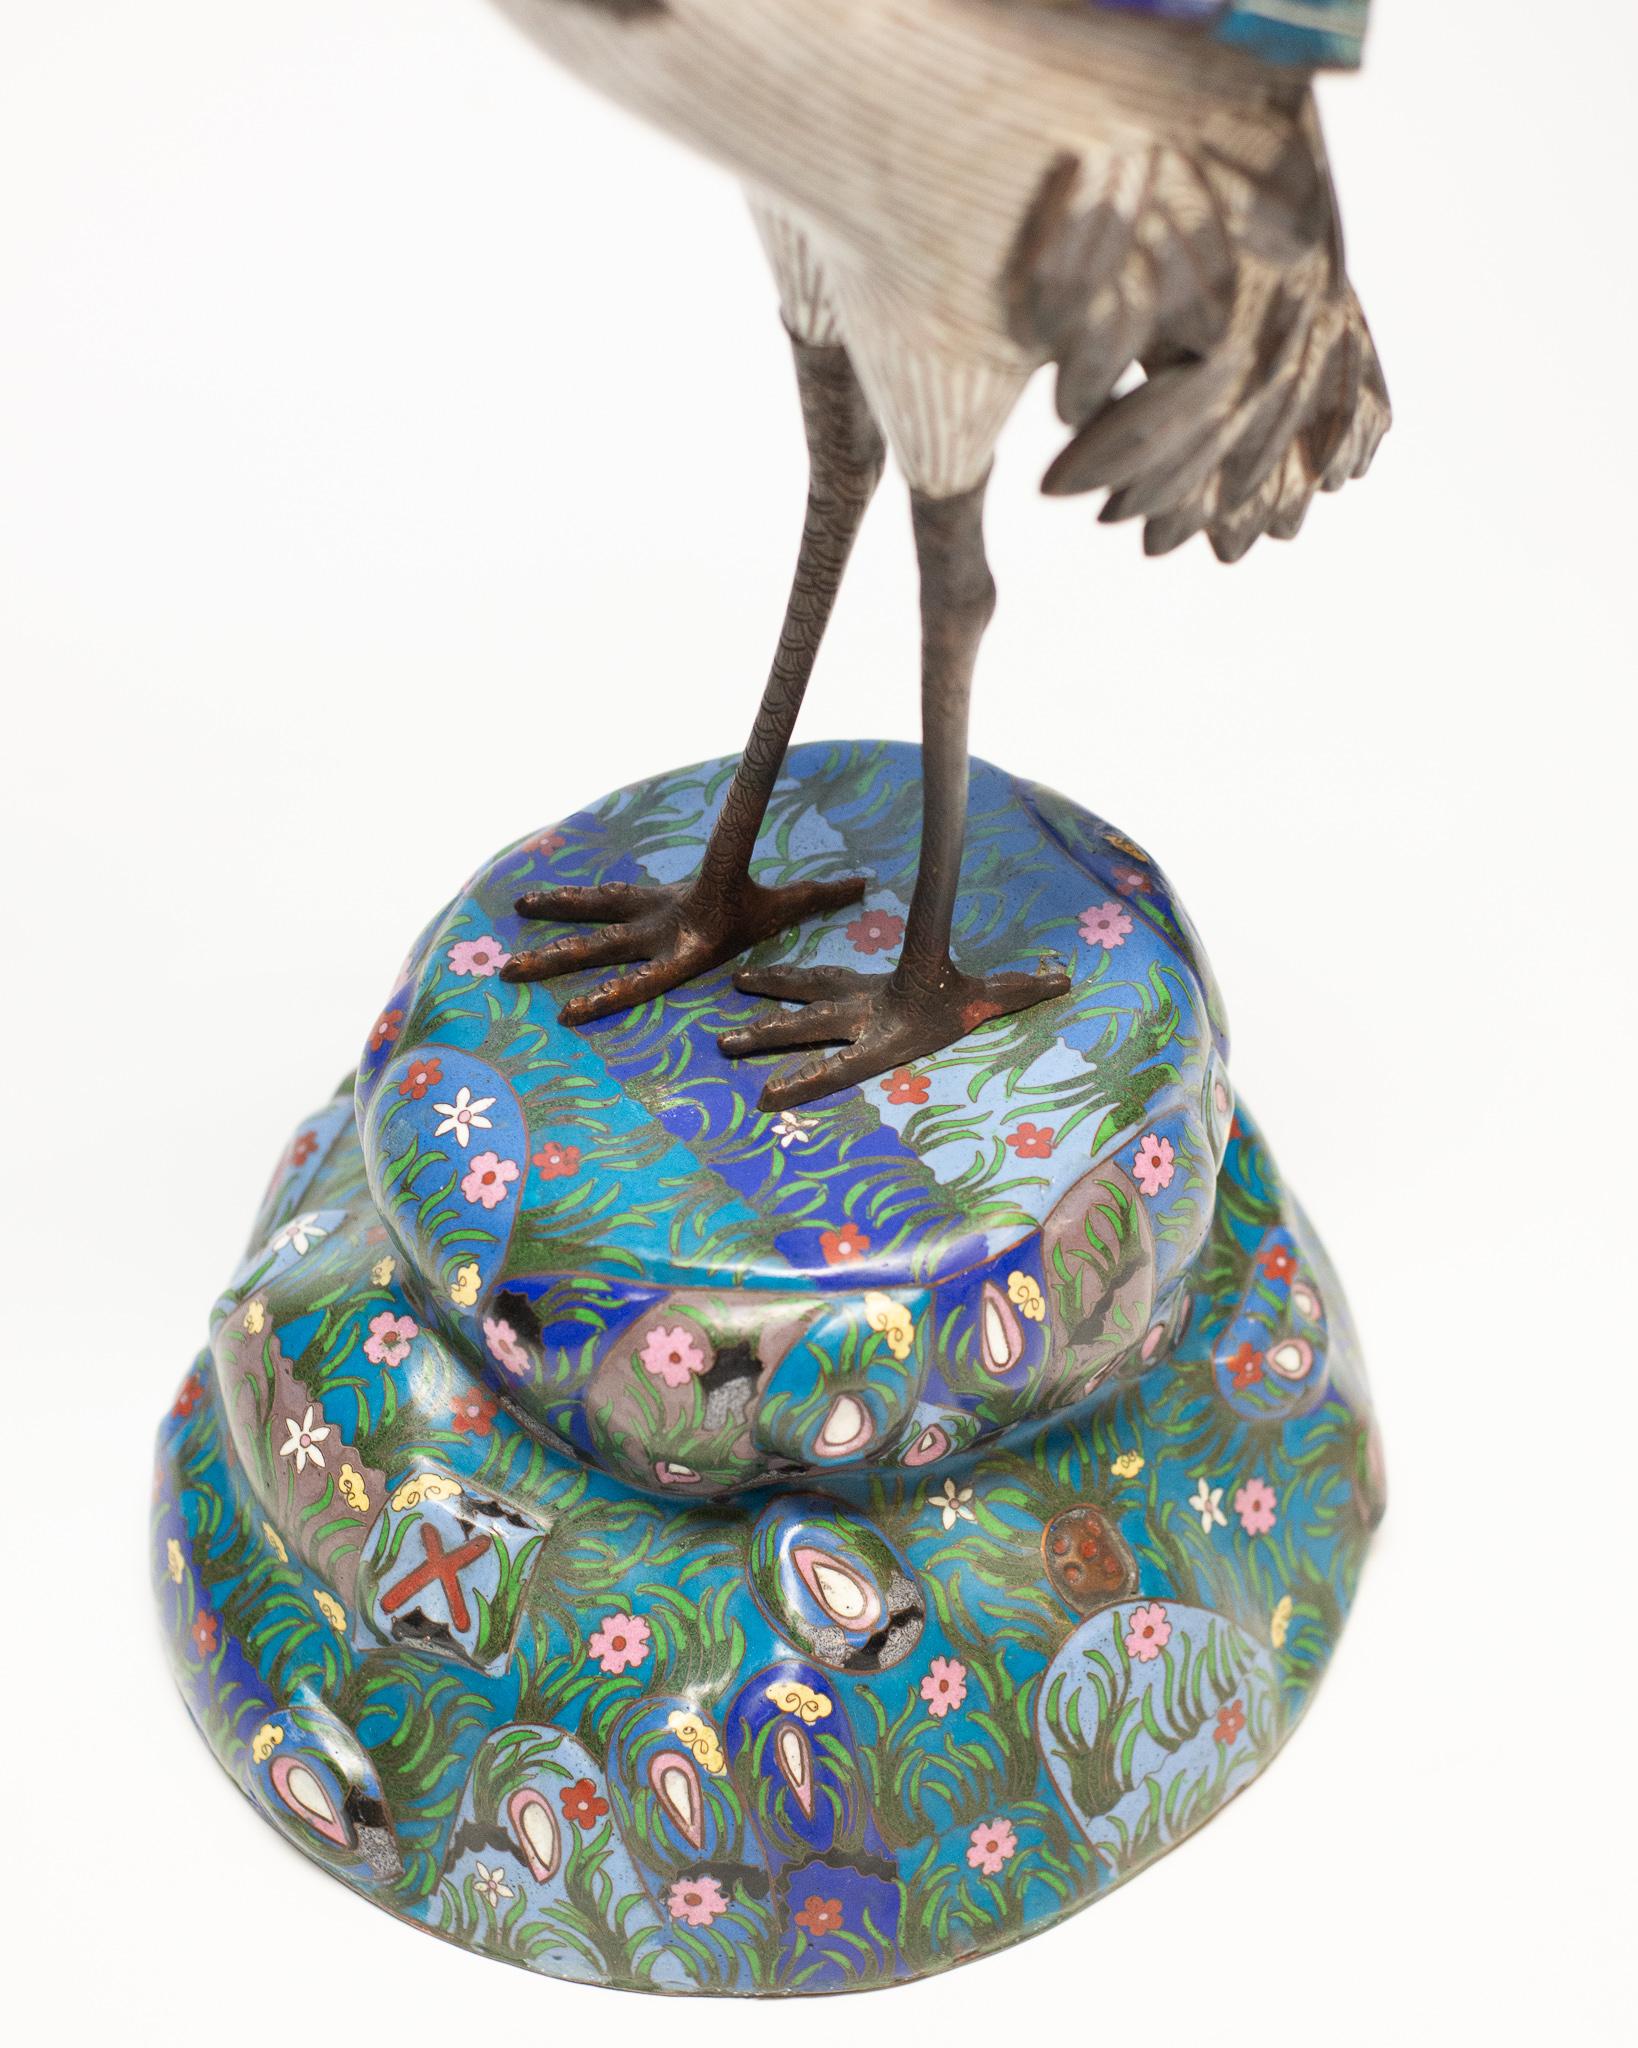 This fine pair of antique Cloisonné cranes would look equally good on a console or acrylic stand and would add presence to any room. Cloisonné, derived from the French word “enclosed” is an ancient technique of decorating metalwork objects. This